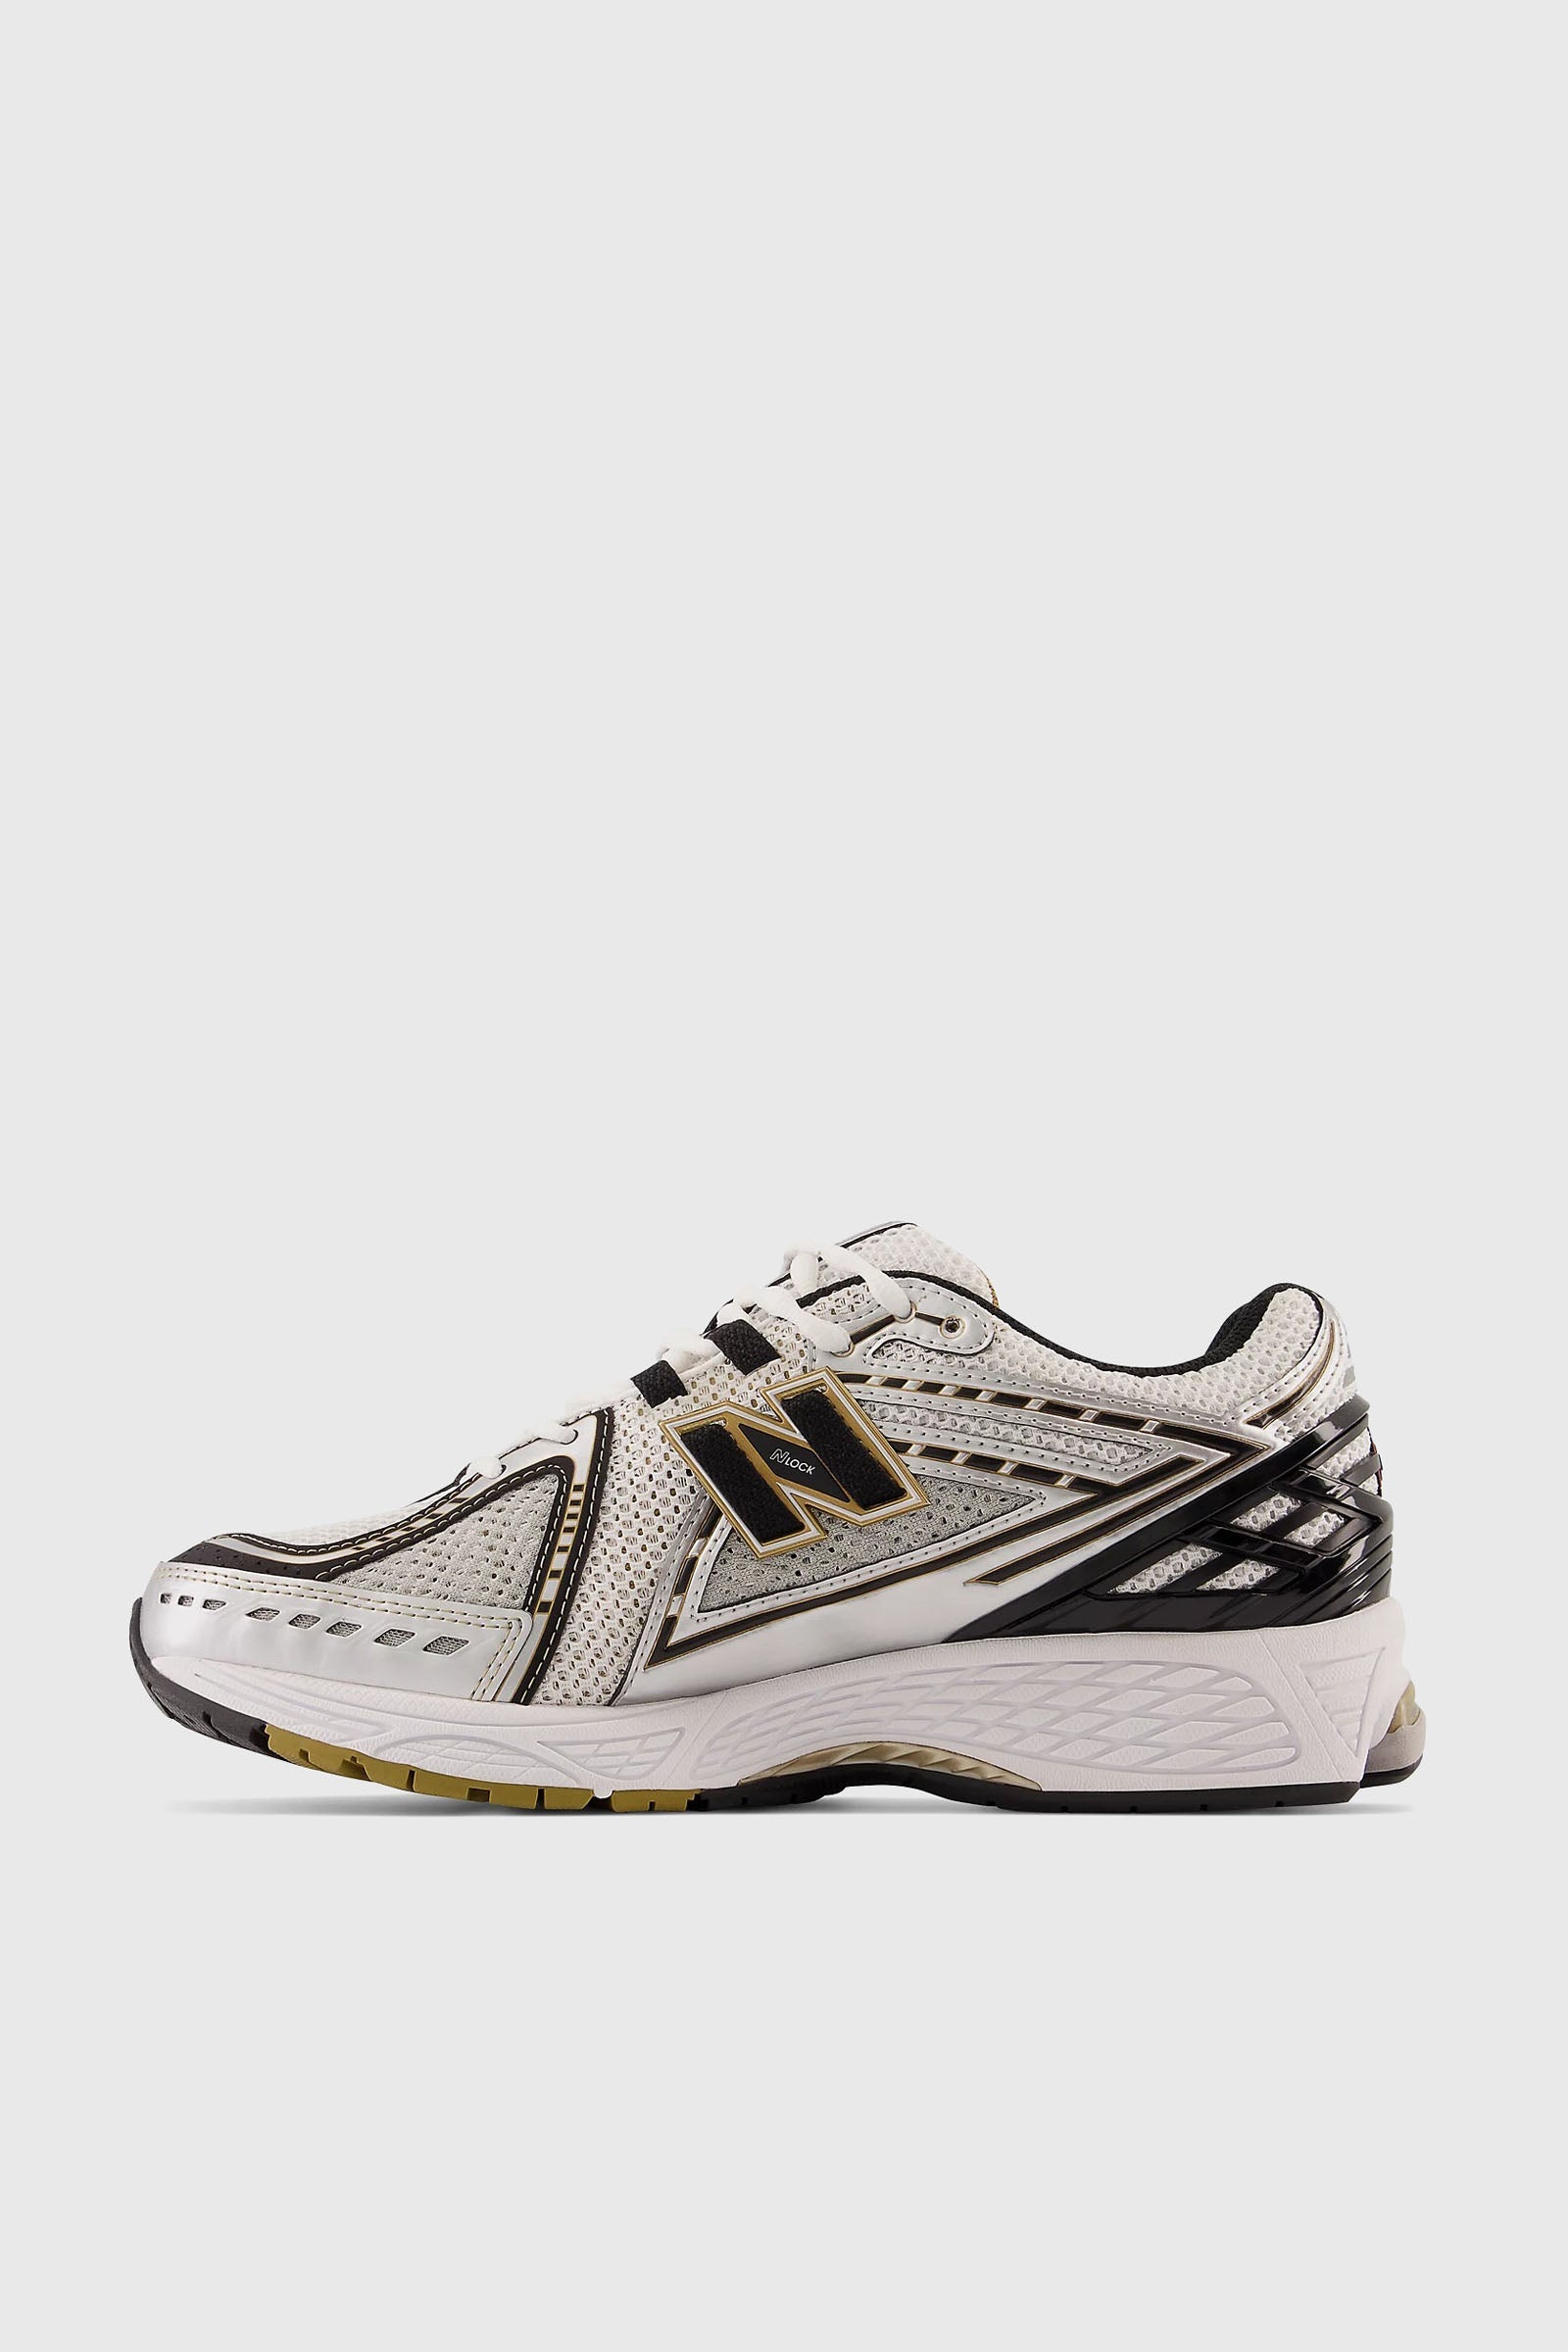 H1 Title: New Balance White/Gold Synthetic Running Shoes 1906R - 5